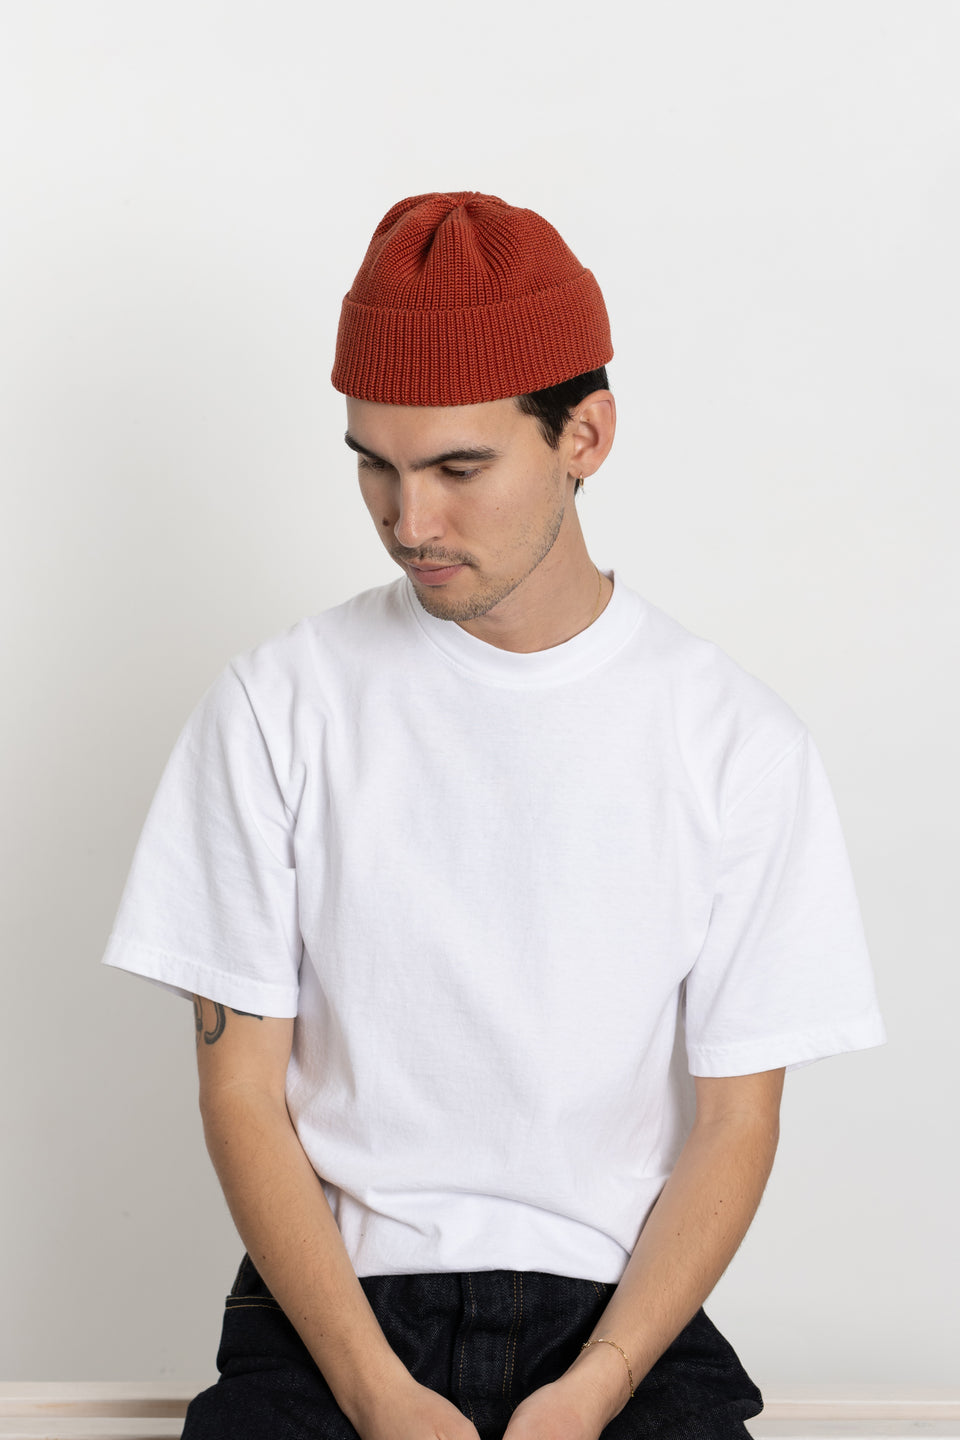 Found Feather Made in Japan Men's Collection FW23 Knit Watch Cap Italian Merino Wool Orange Calculus Victoria BC Canada